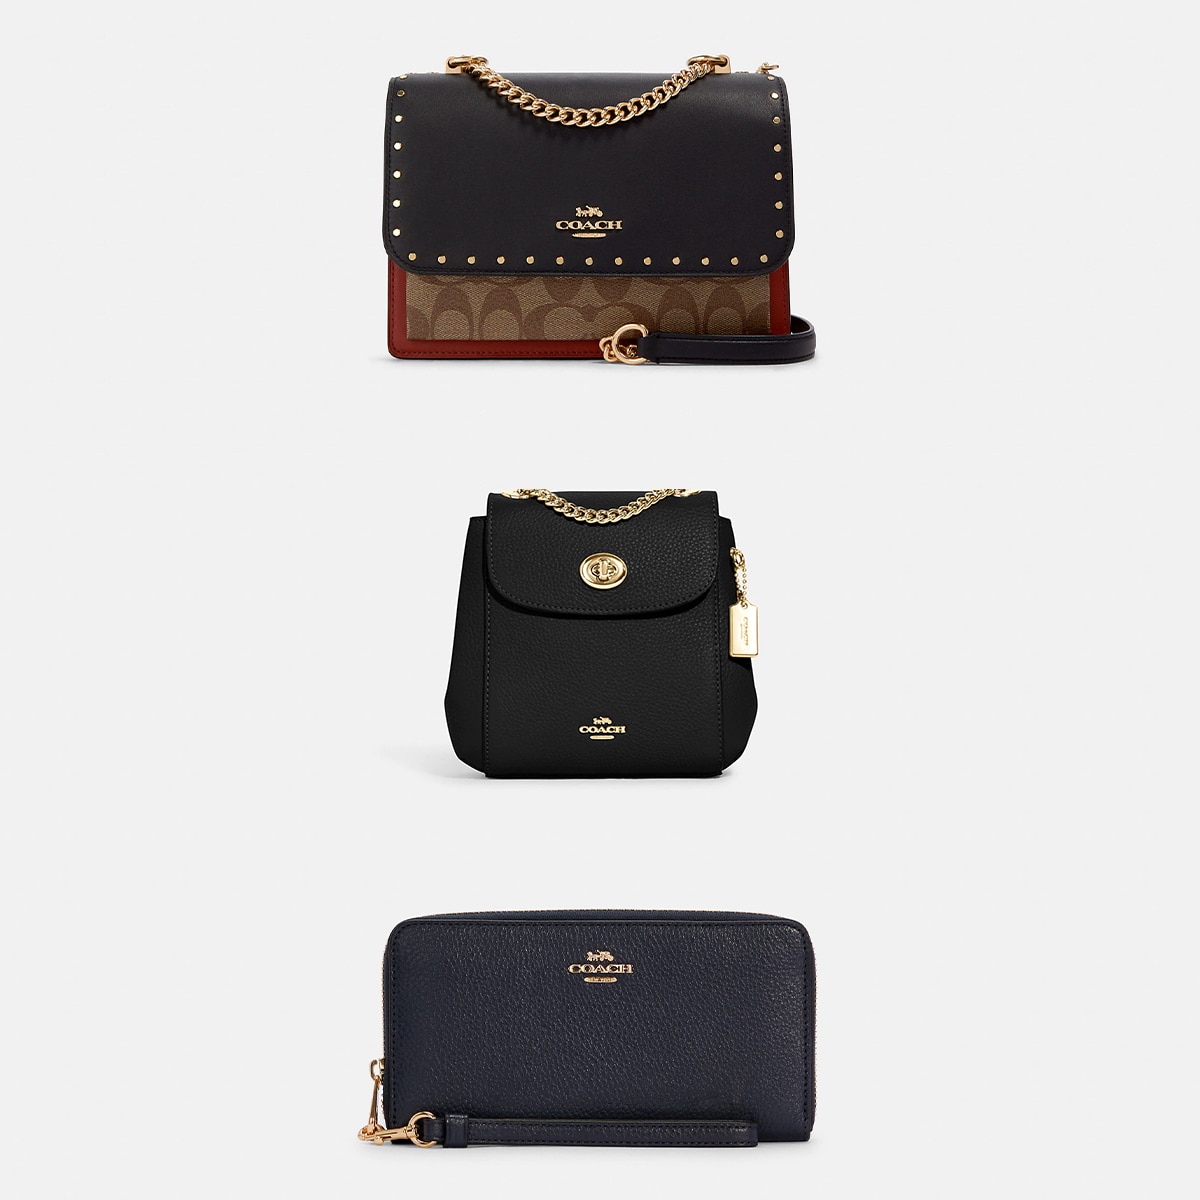 Buy The Lowest Price Coach Crossbody Bags In Our Online Store ! handbags  outlet only $39 for Christmas gift